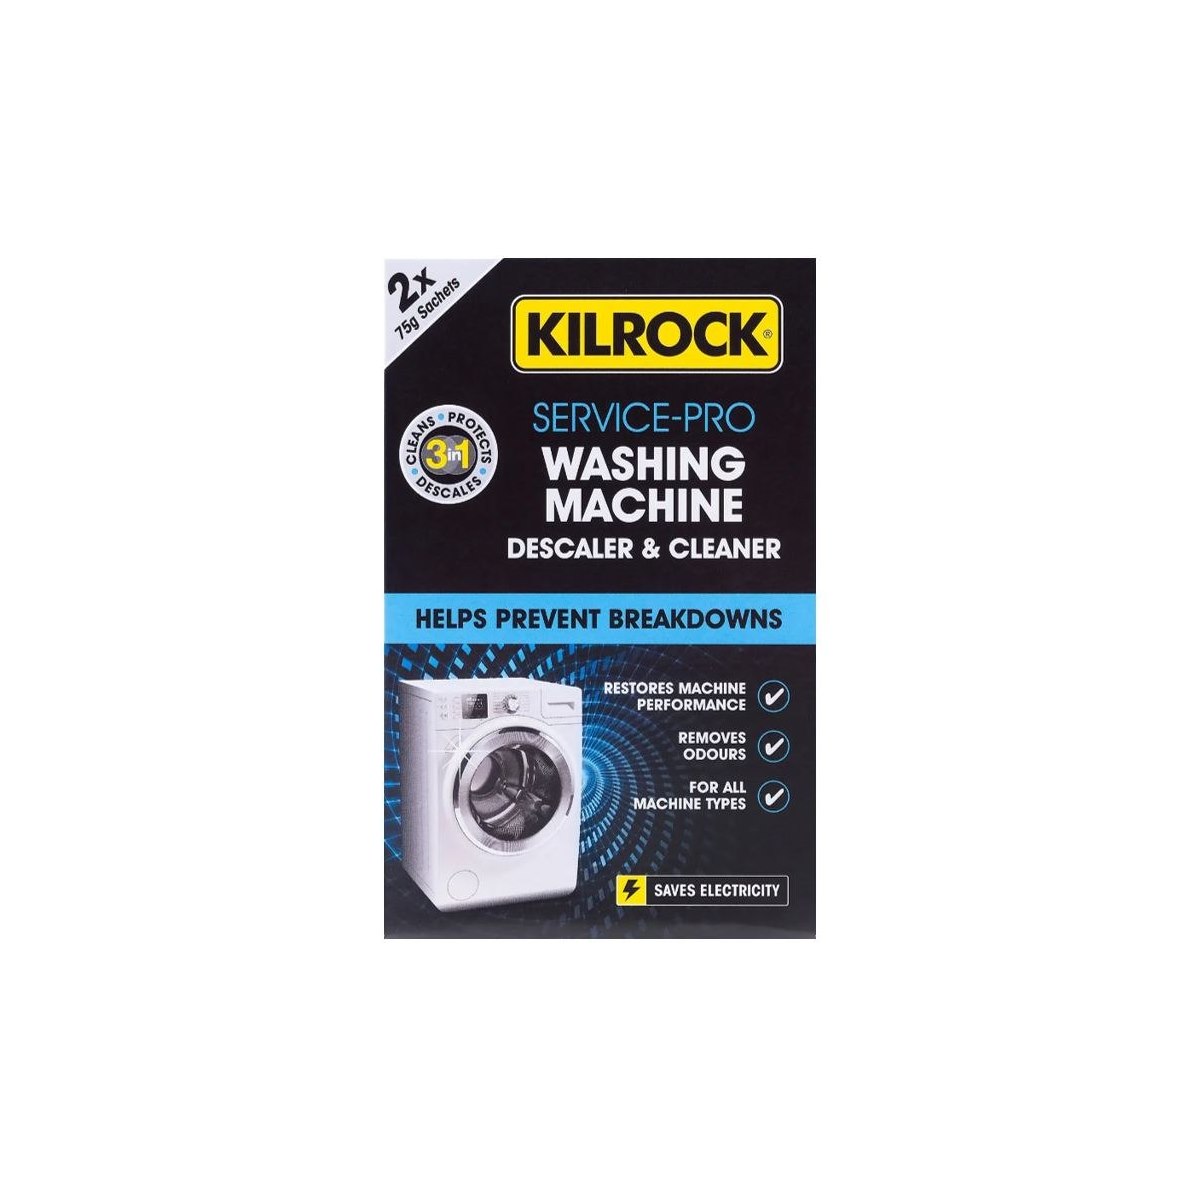 Kilrock Service Pro Washing Machine Descaler and Cleaner 2 x 75g Sachets